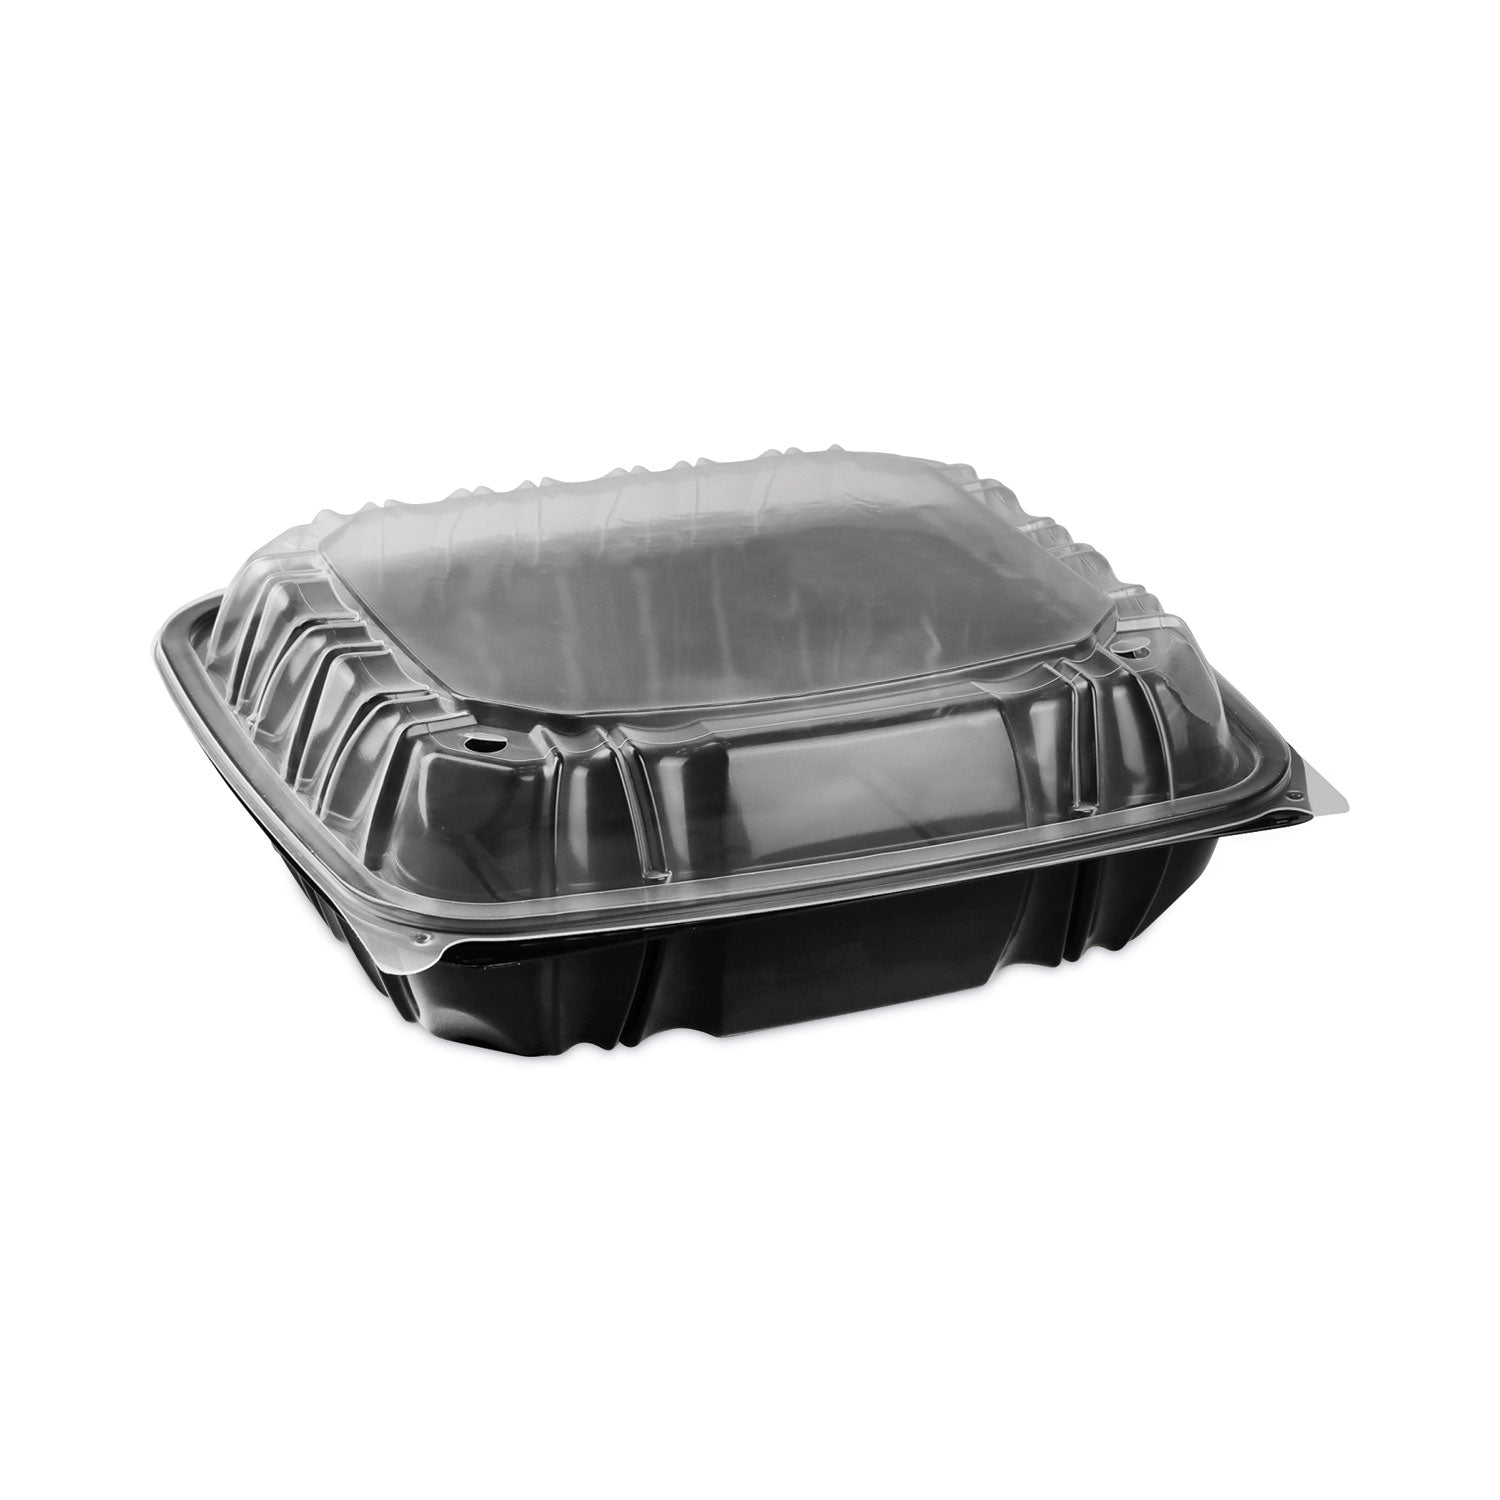 earthchoice-vented-dual-color-microwavable-hinged-lid-container-1-compartment-66oz-105x95x3-black-clear-plastic-132-ct_pctdc109100b000 - 1